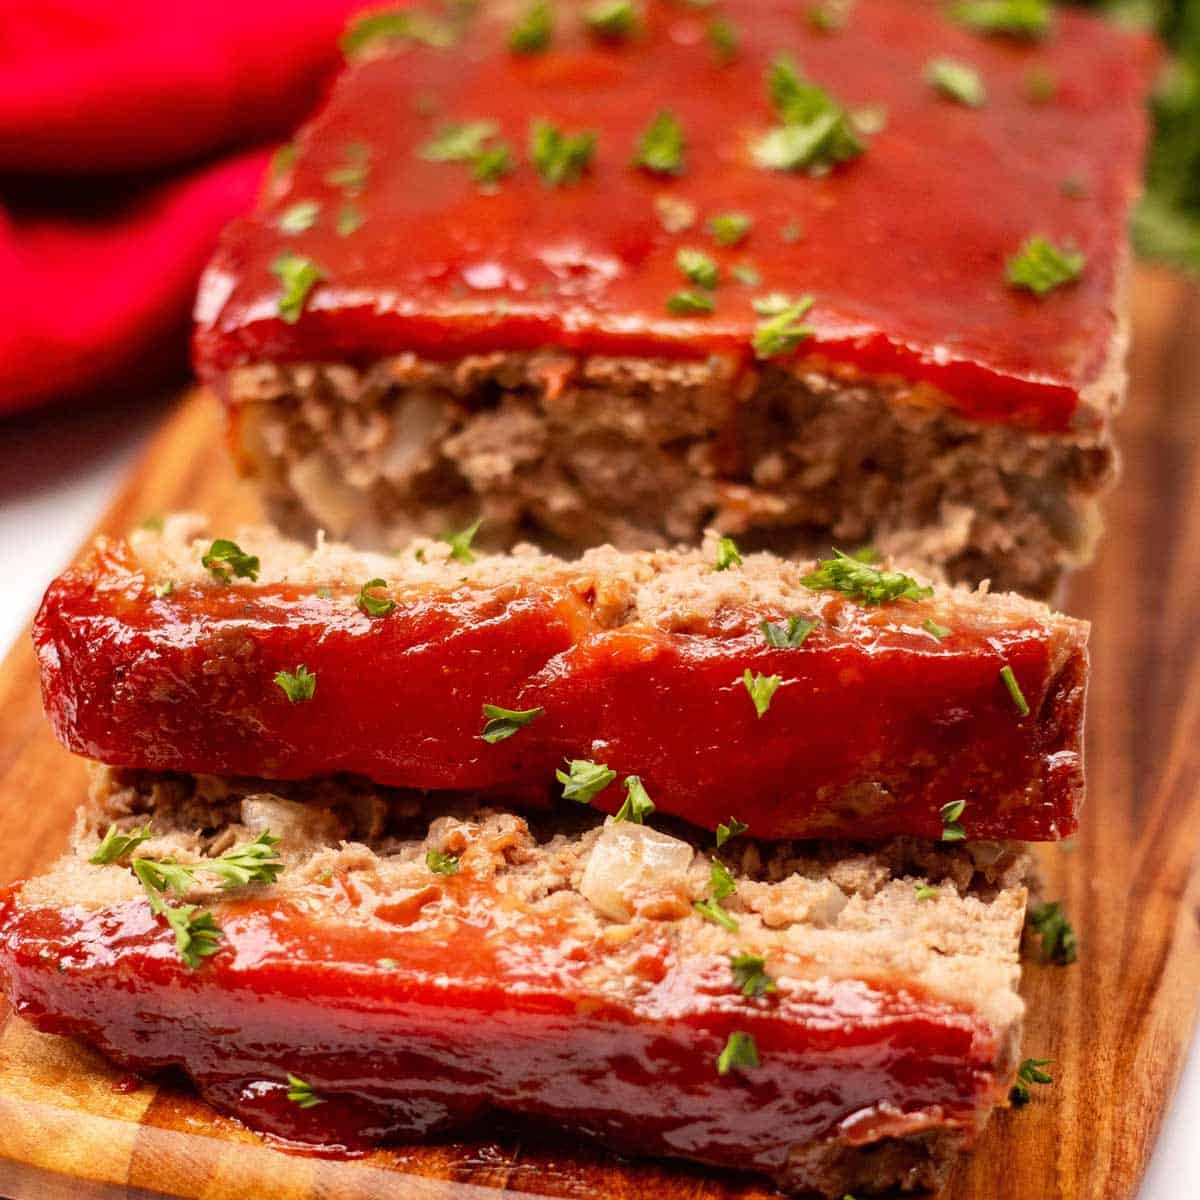 Meatloaf on a cutting board garnished with fresh parsley. Two one-inch slices are cut off the loaf.